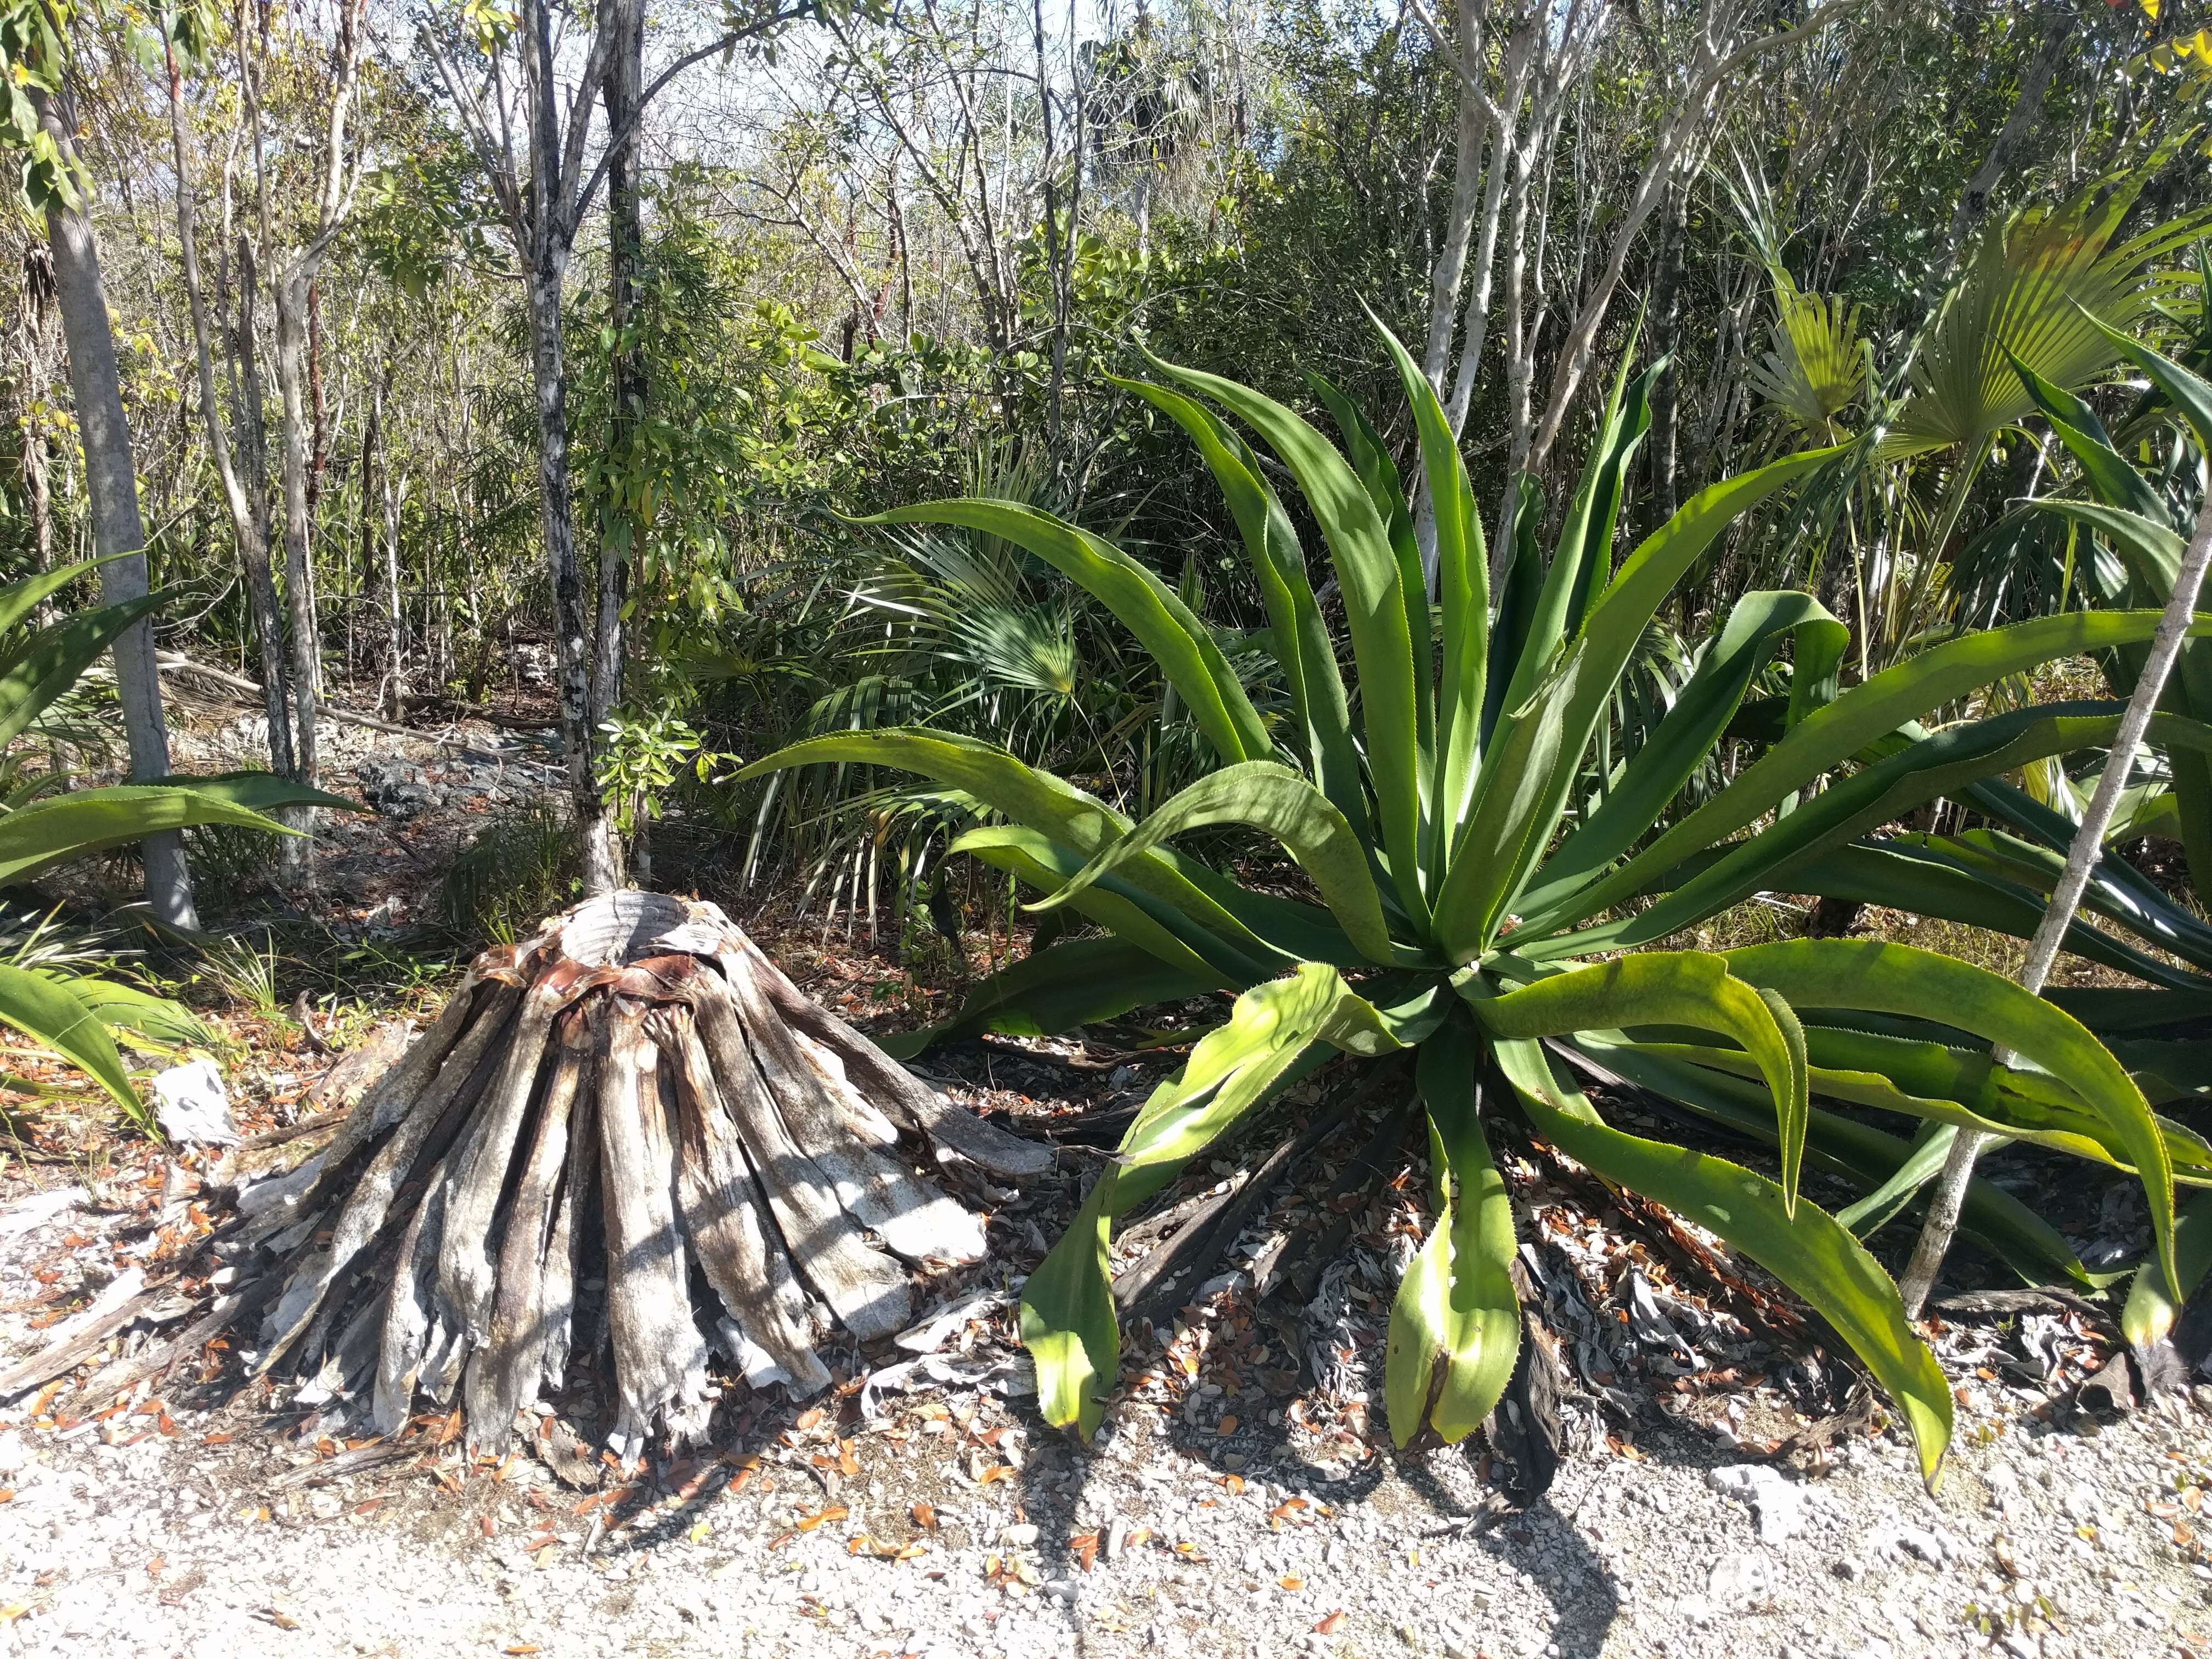 Image of Agave caymanensis Proctor